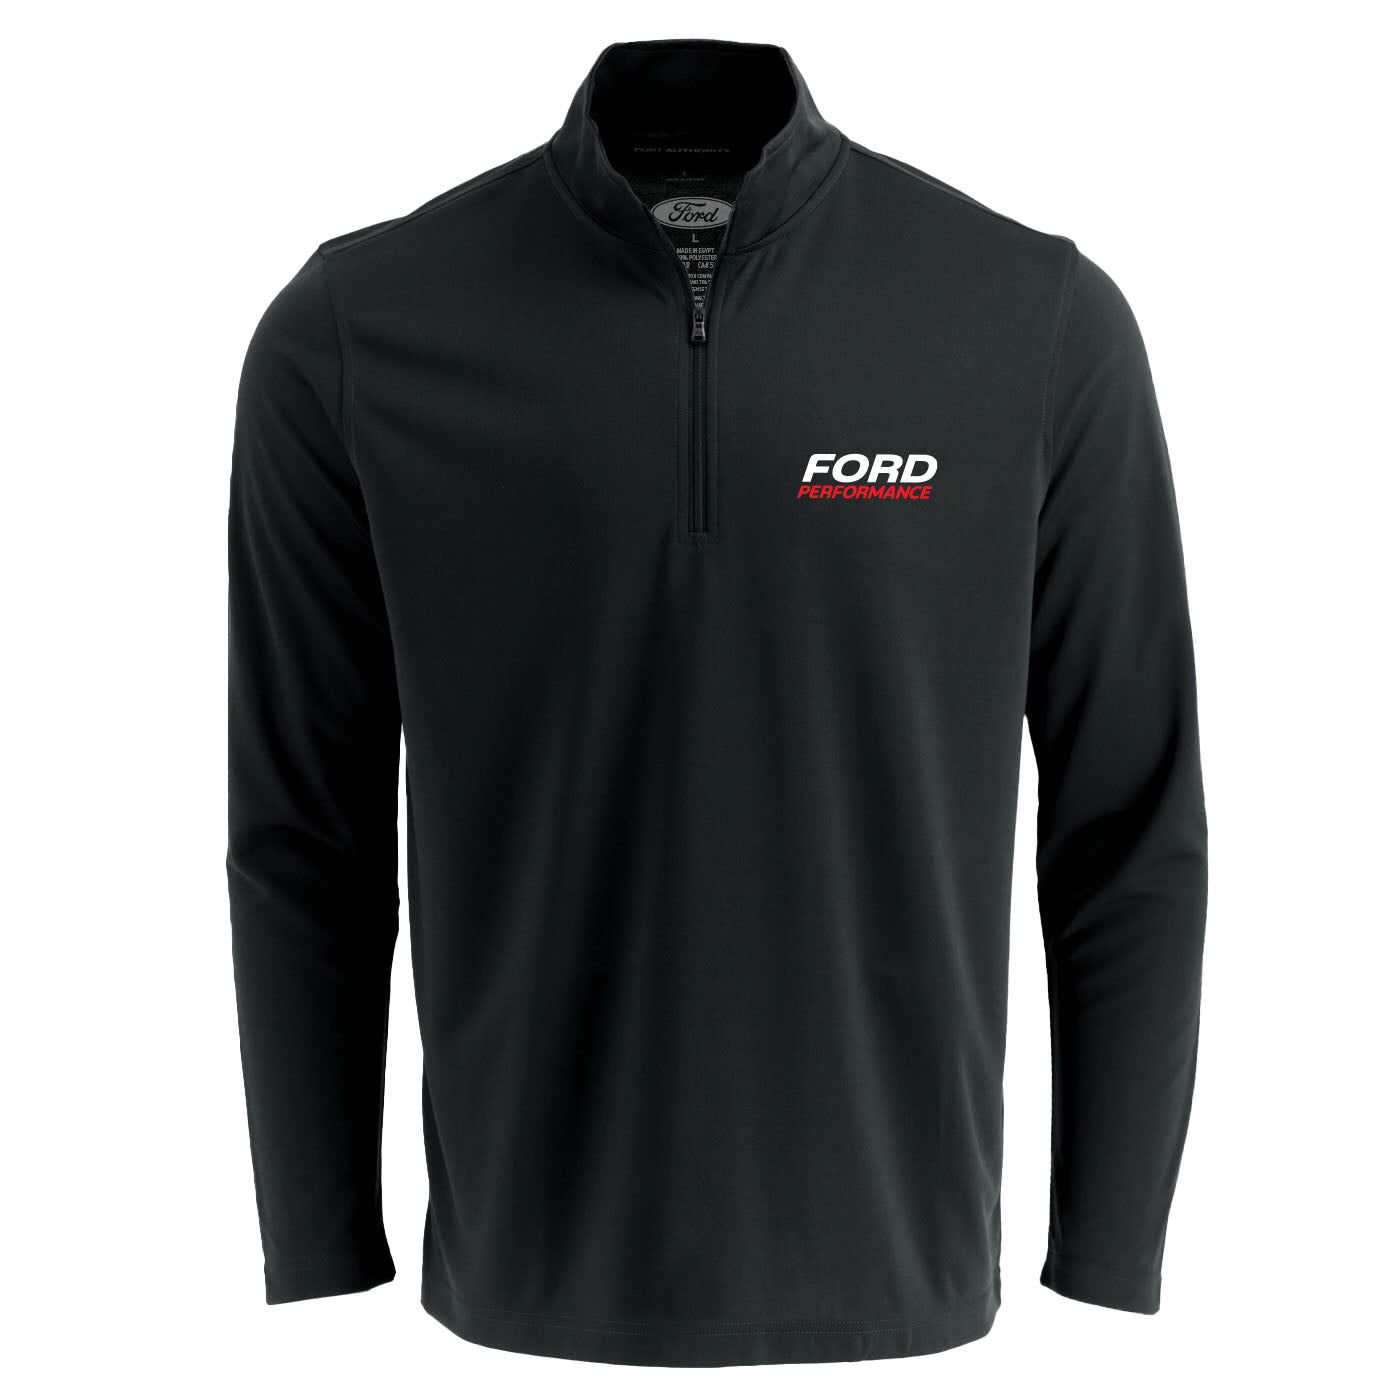 FORD PERFORMANCE MENS FLEECE JACKET – The Pits